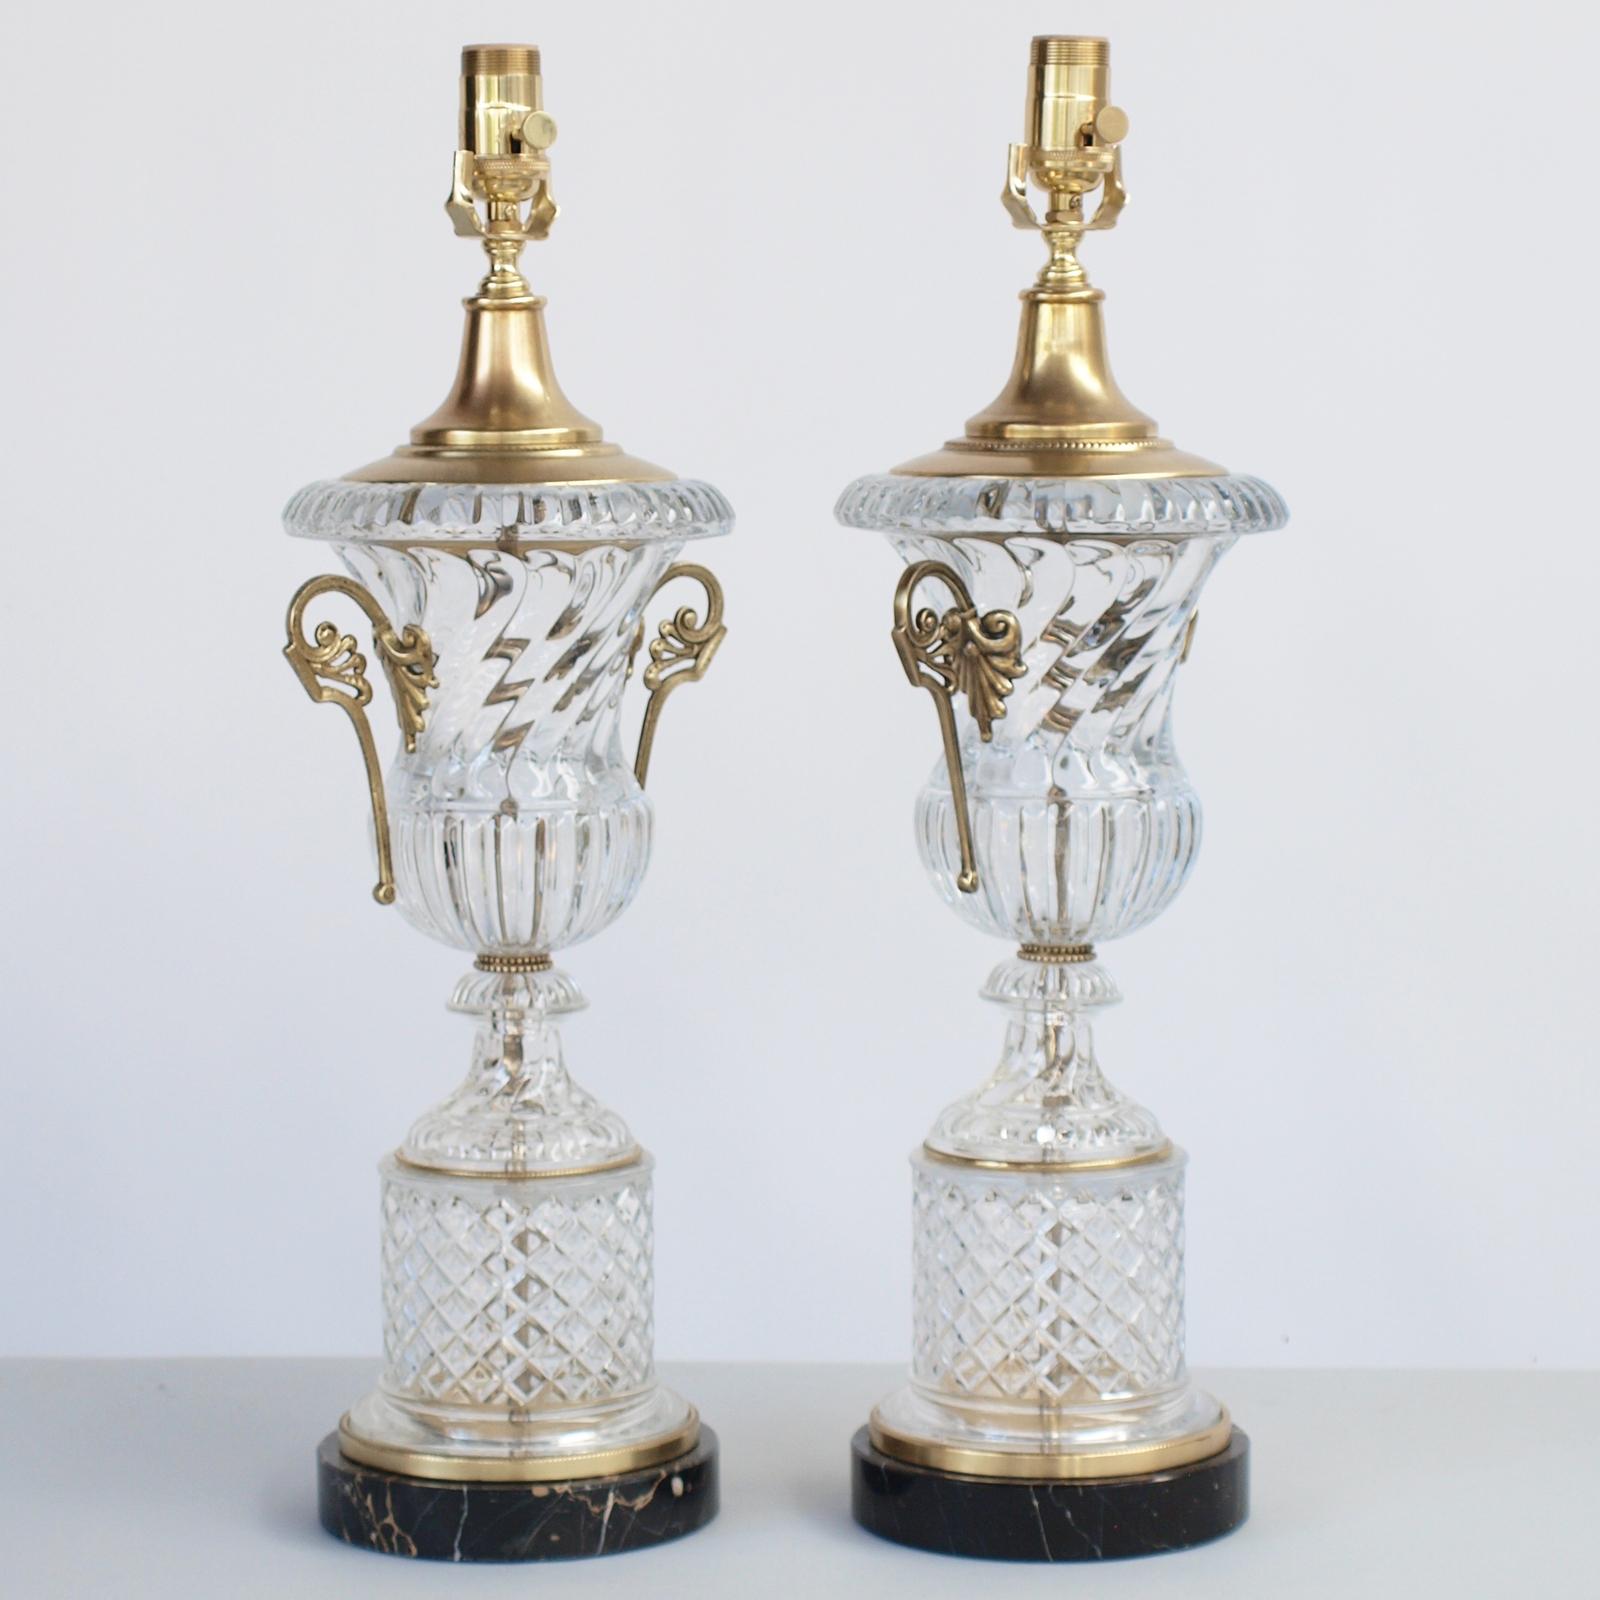 Pair of Baccarat Spiral Urn Glass Lamps In Good Condition For Sale In West Palm Beach, FL